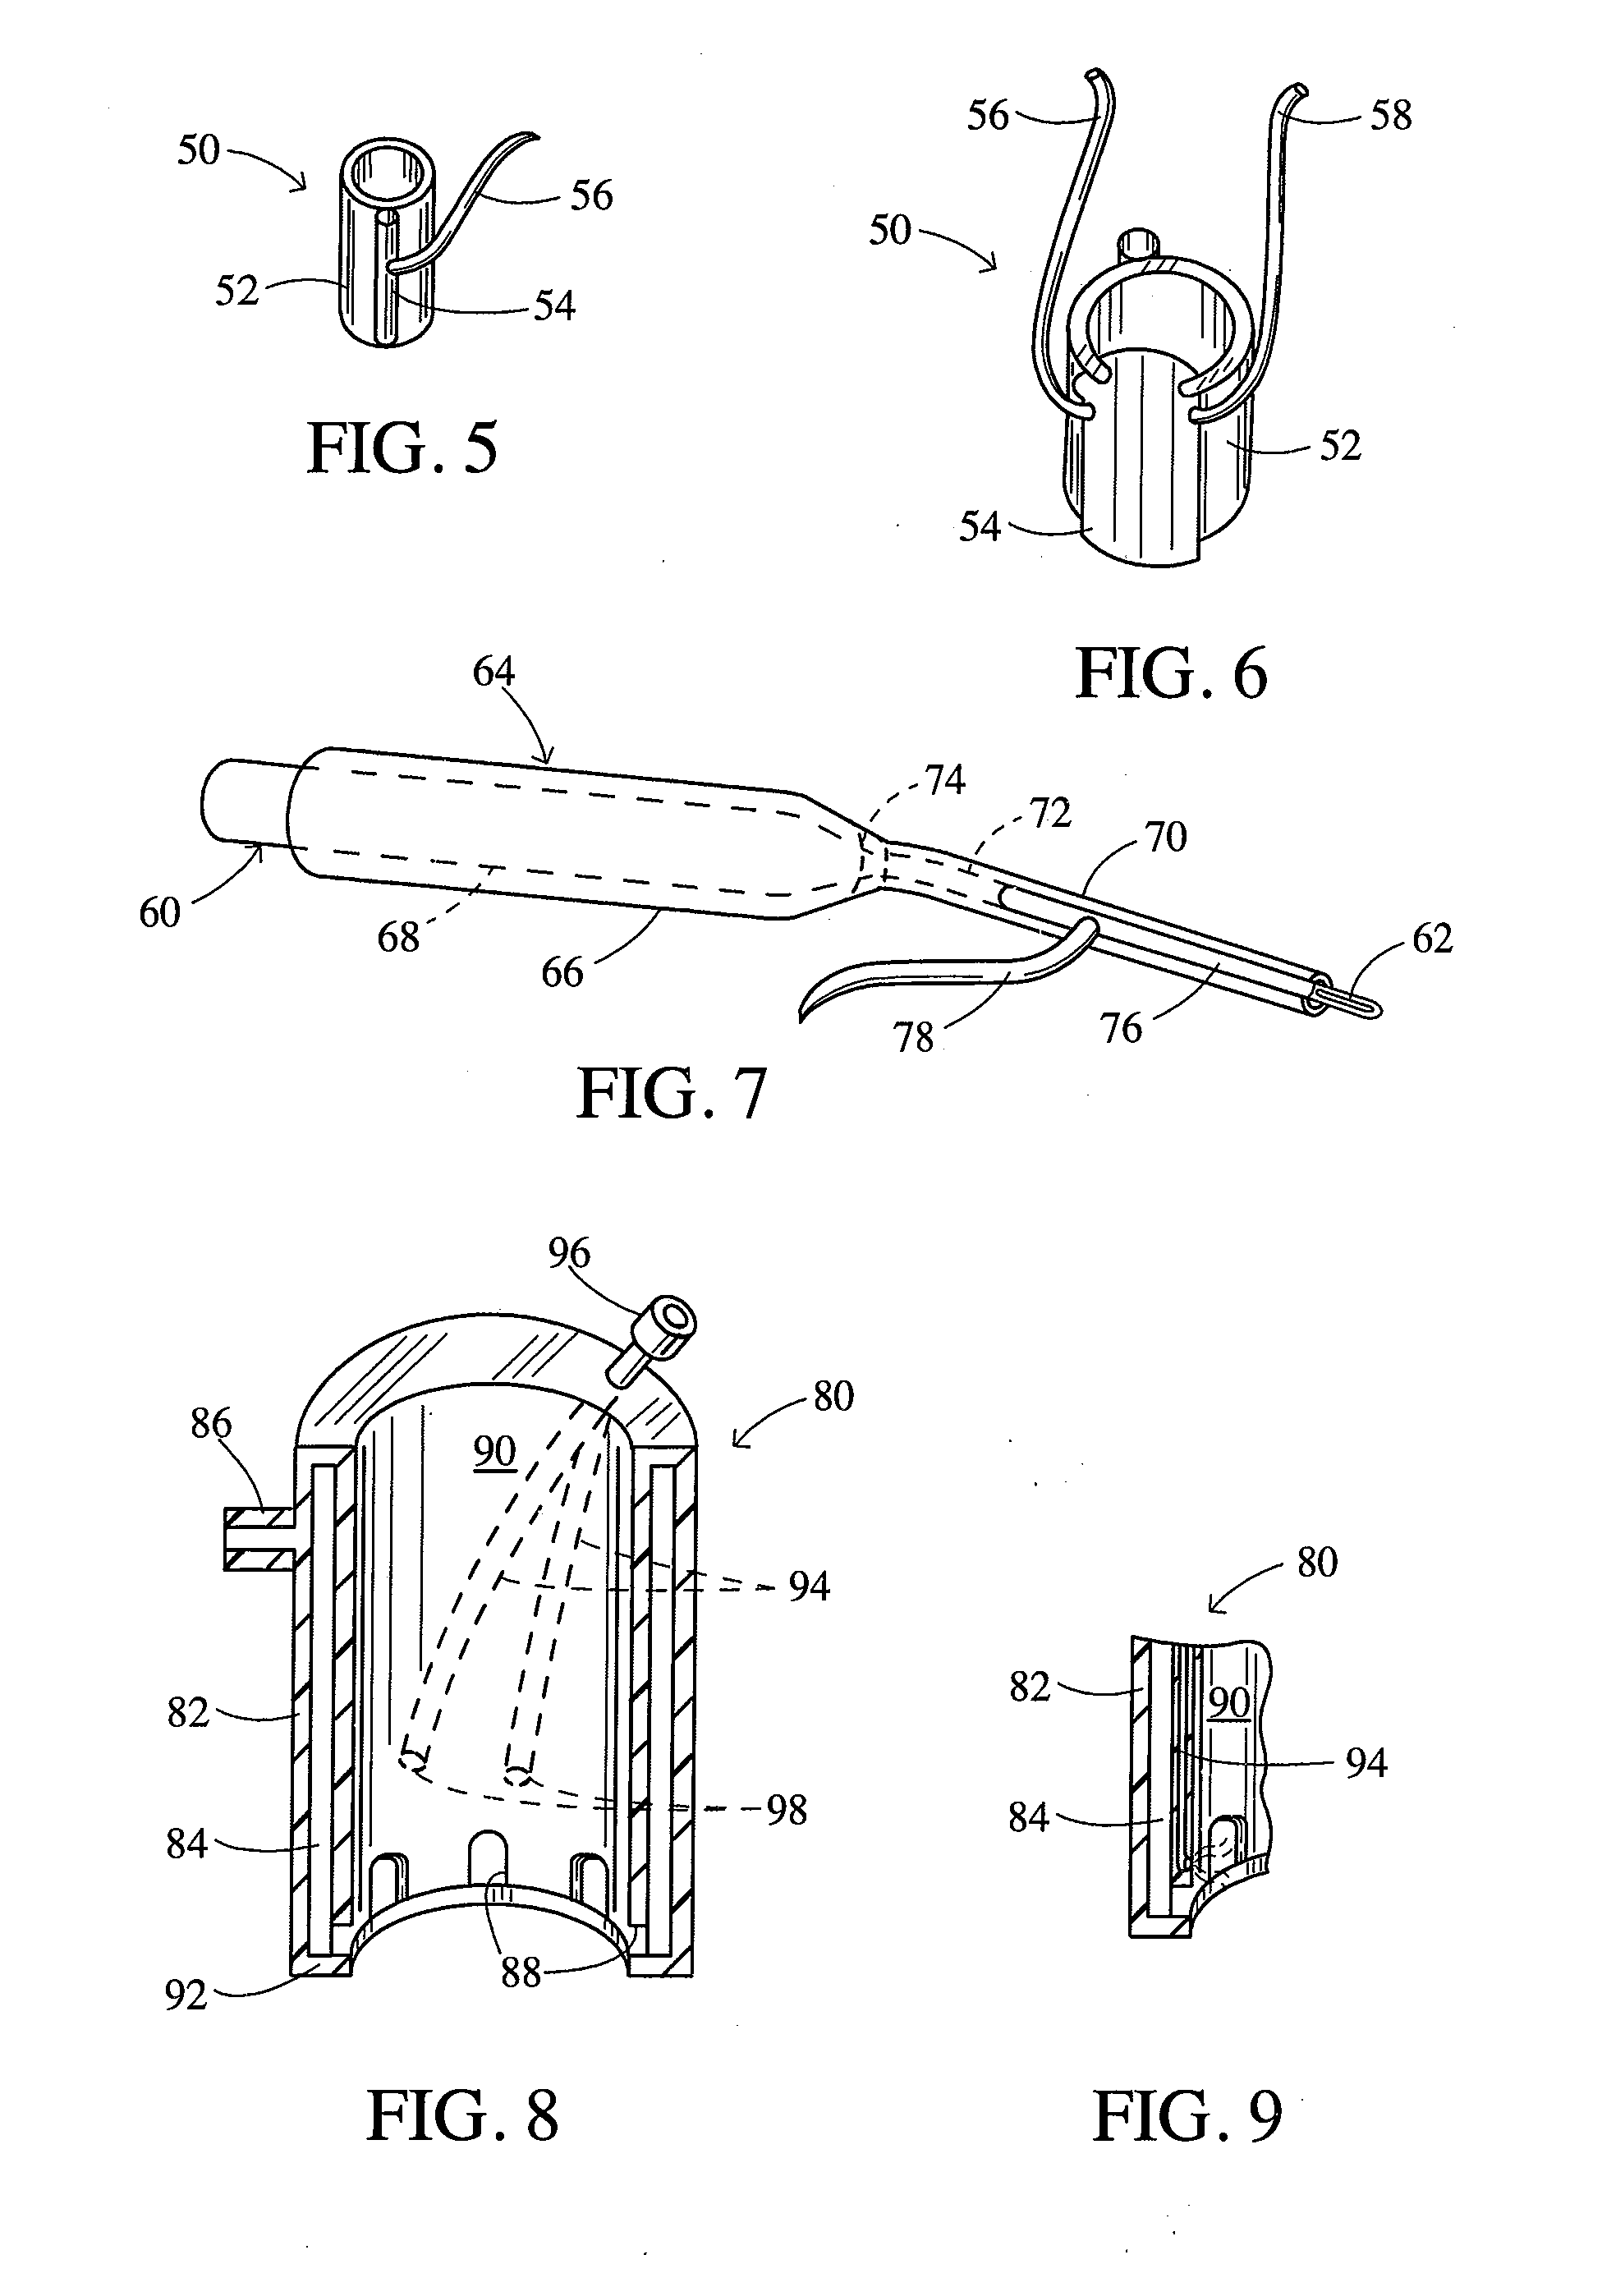 Method for minimally invasive surgery using therapeutic ultrasound to treat spine and orthopedic diseases, injuries and deformities